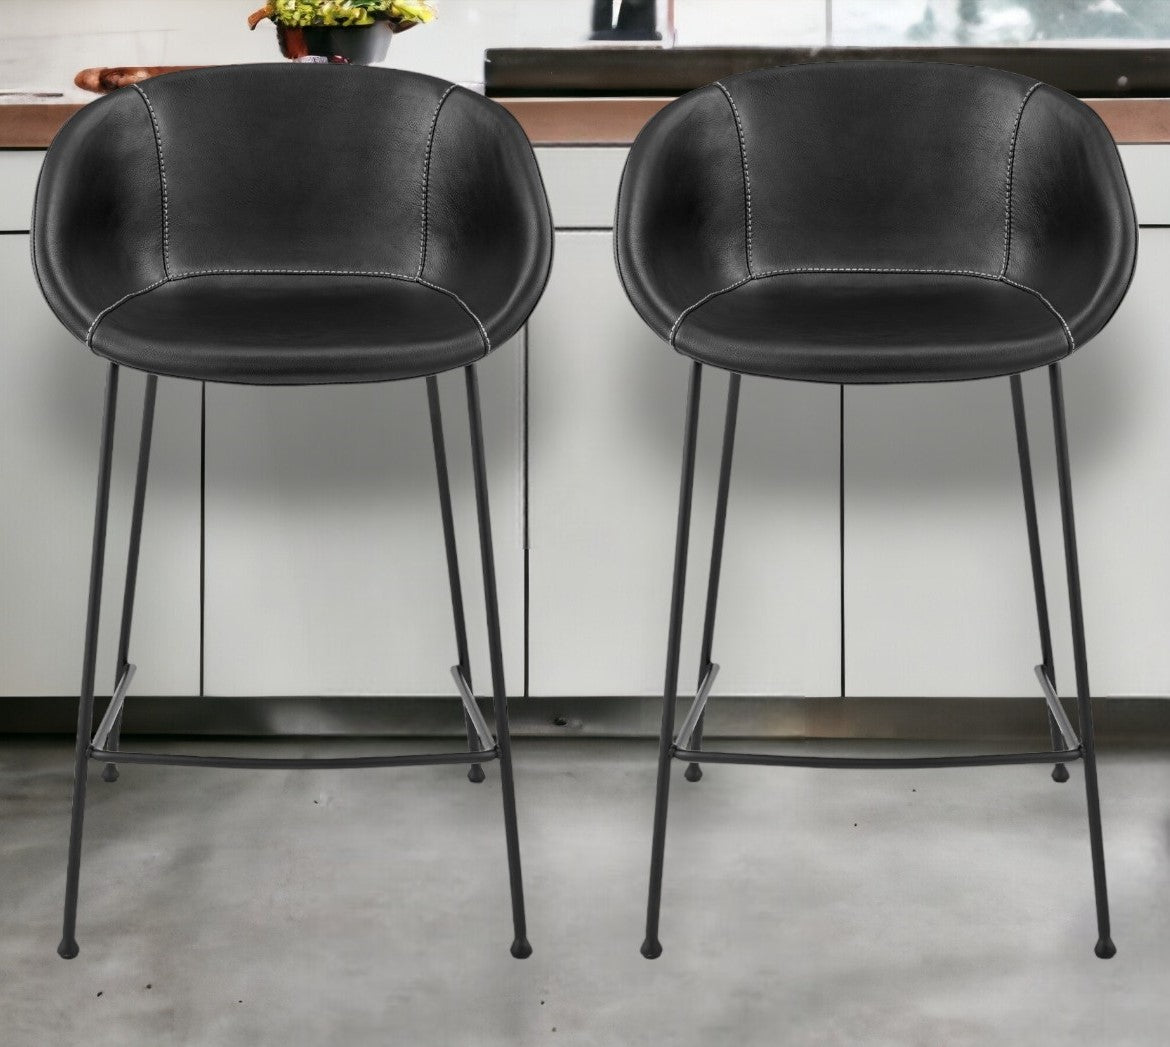 Set of Two 26" Black Faux Leather And Steel Low Back Counter Height Bar Chairs